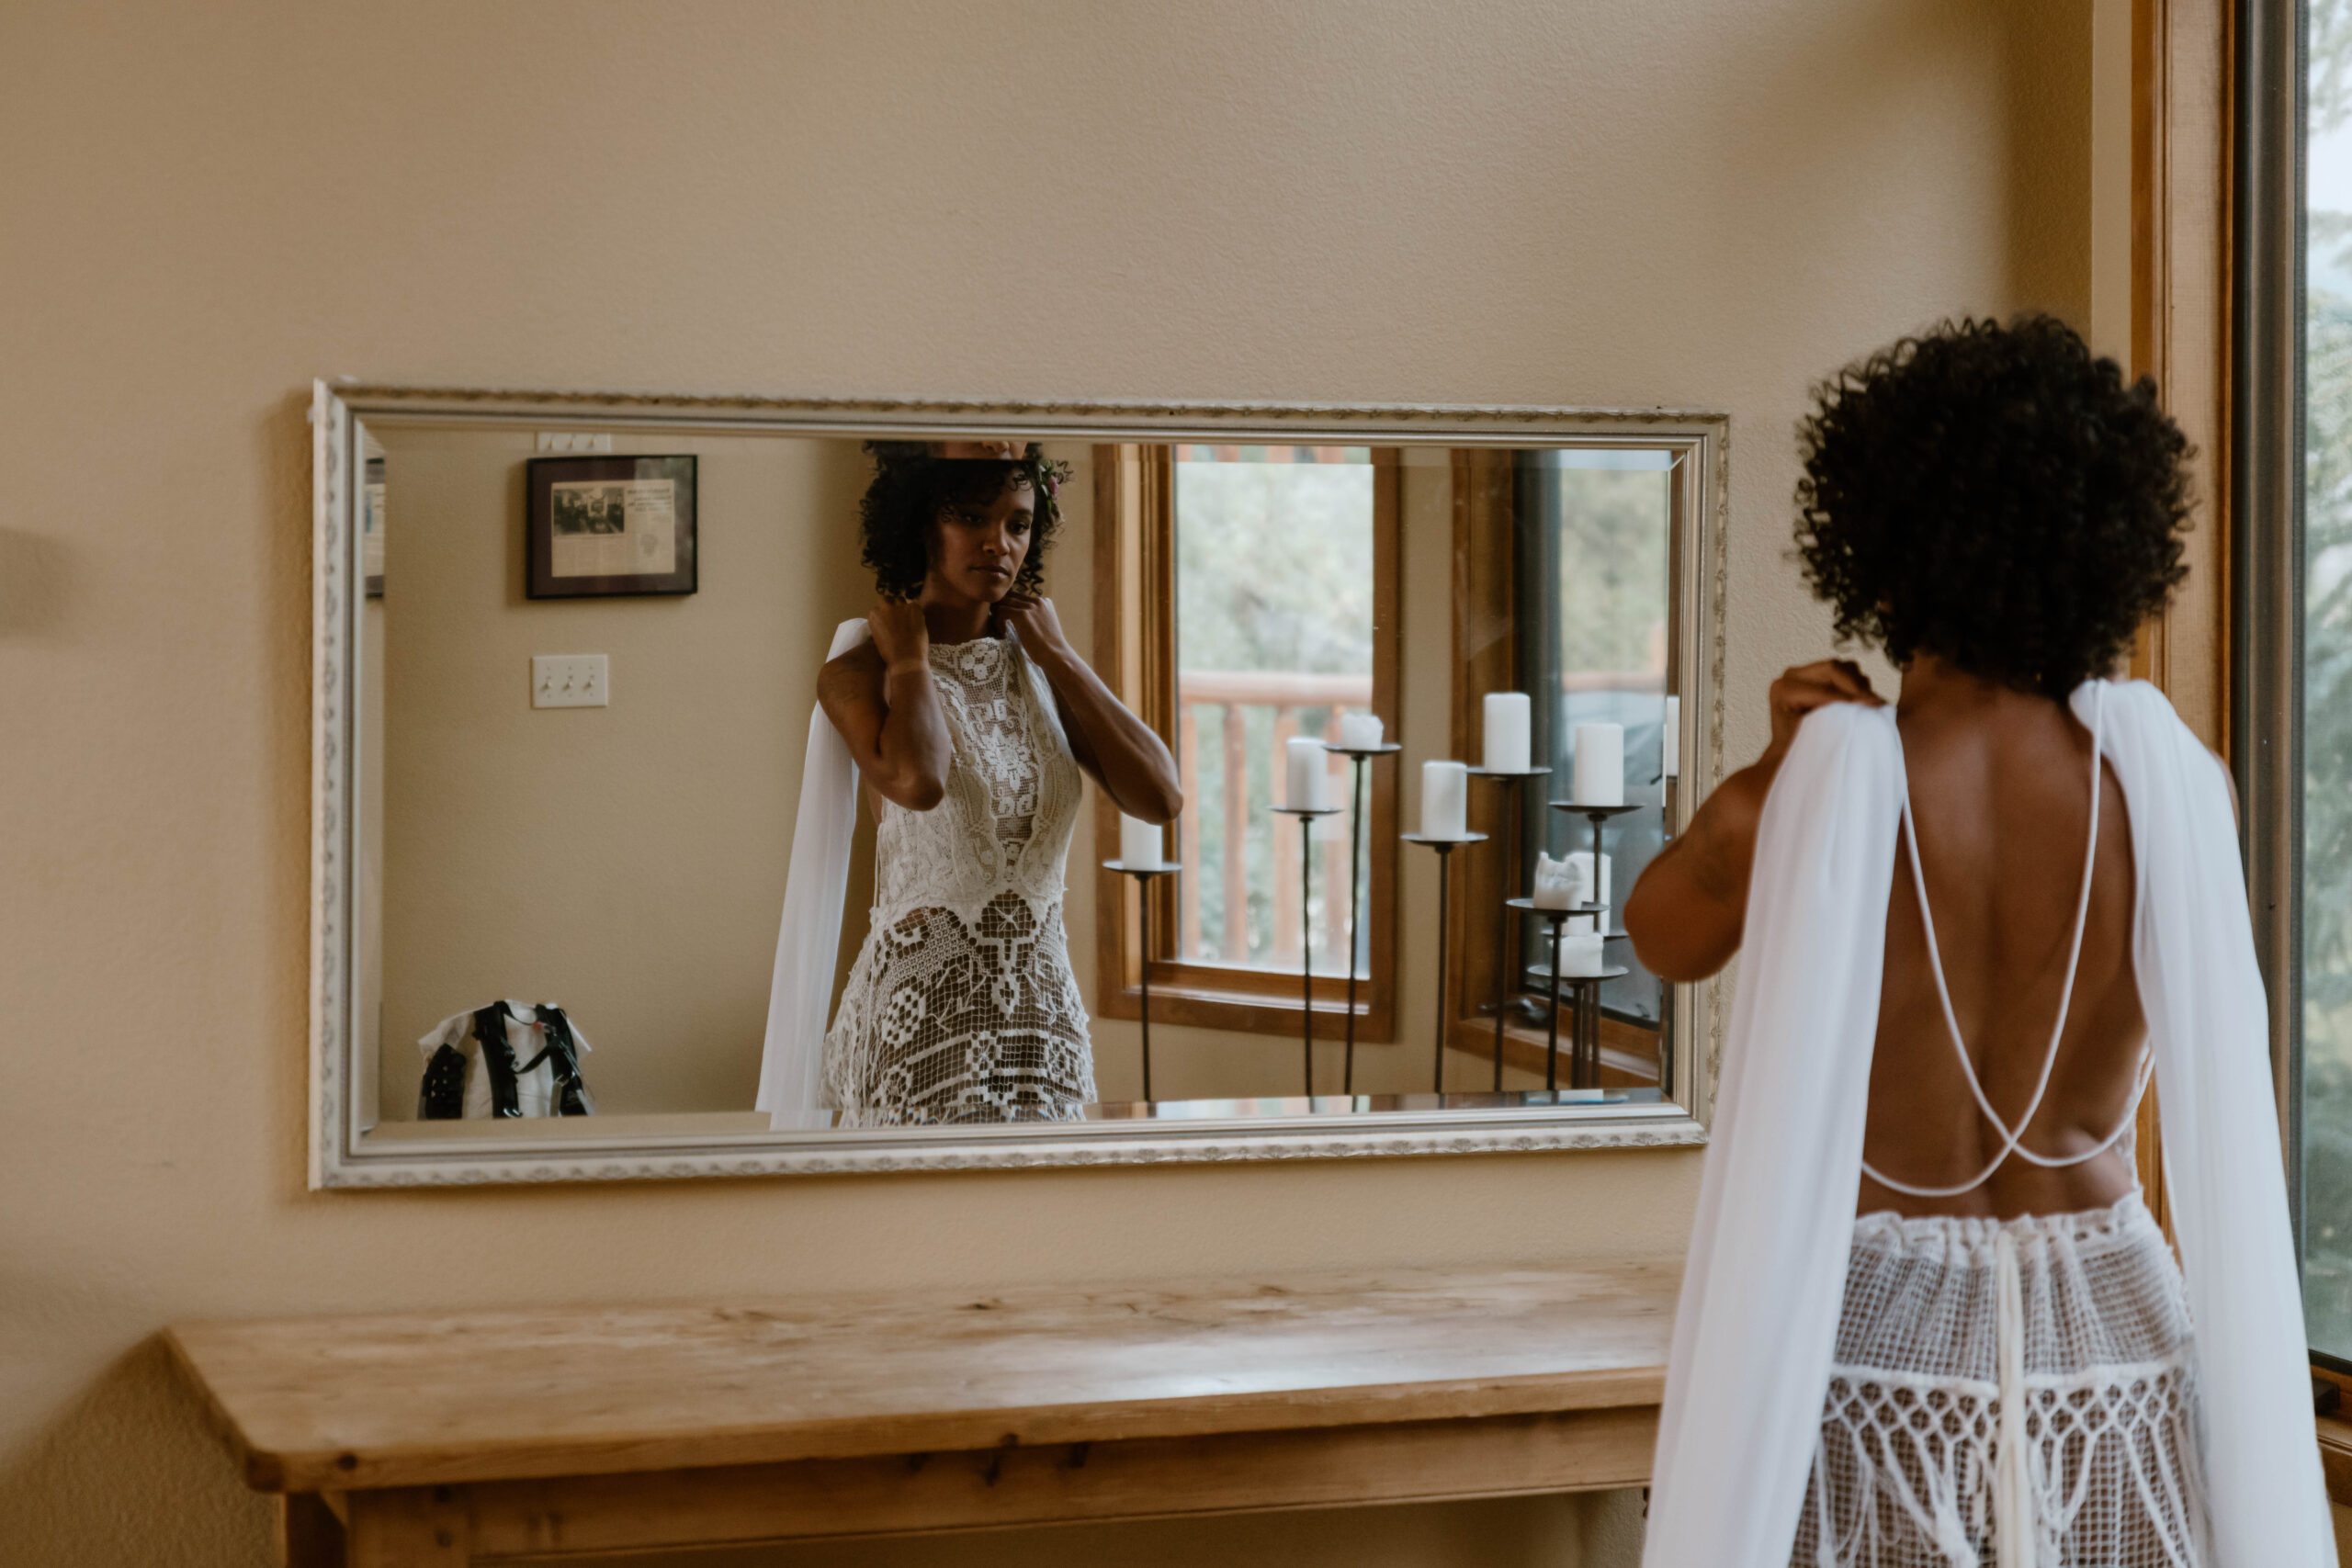 A woman stands looking in a mirror at herself in her wedding dress before the ceremony